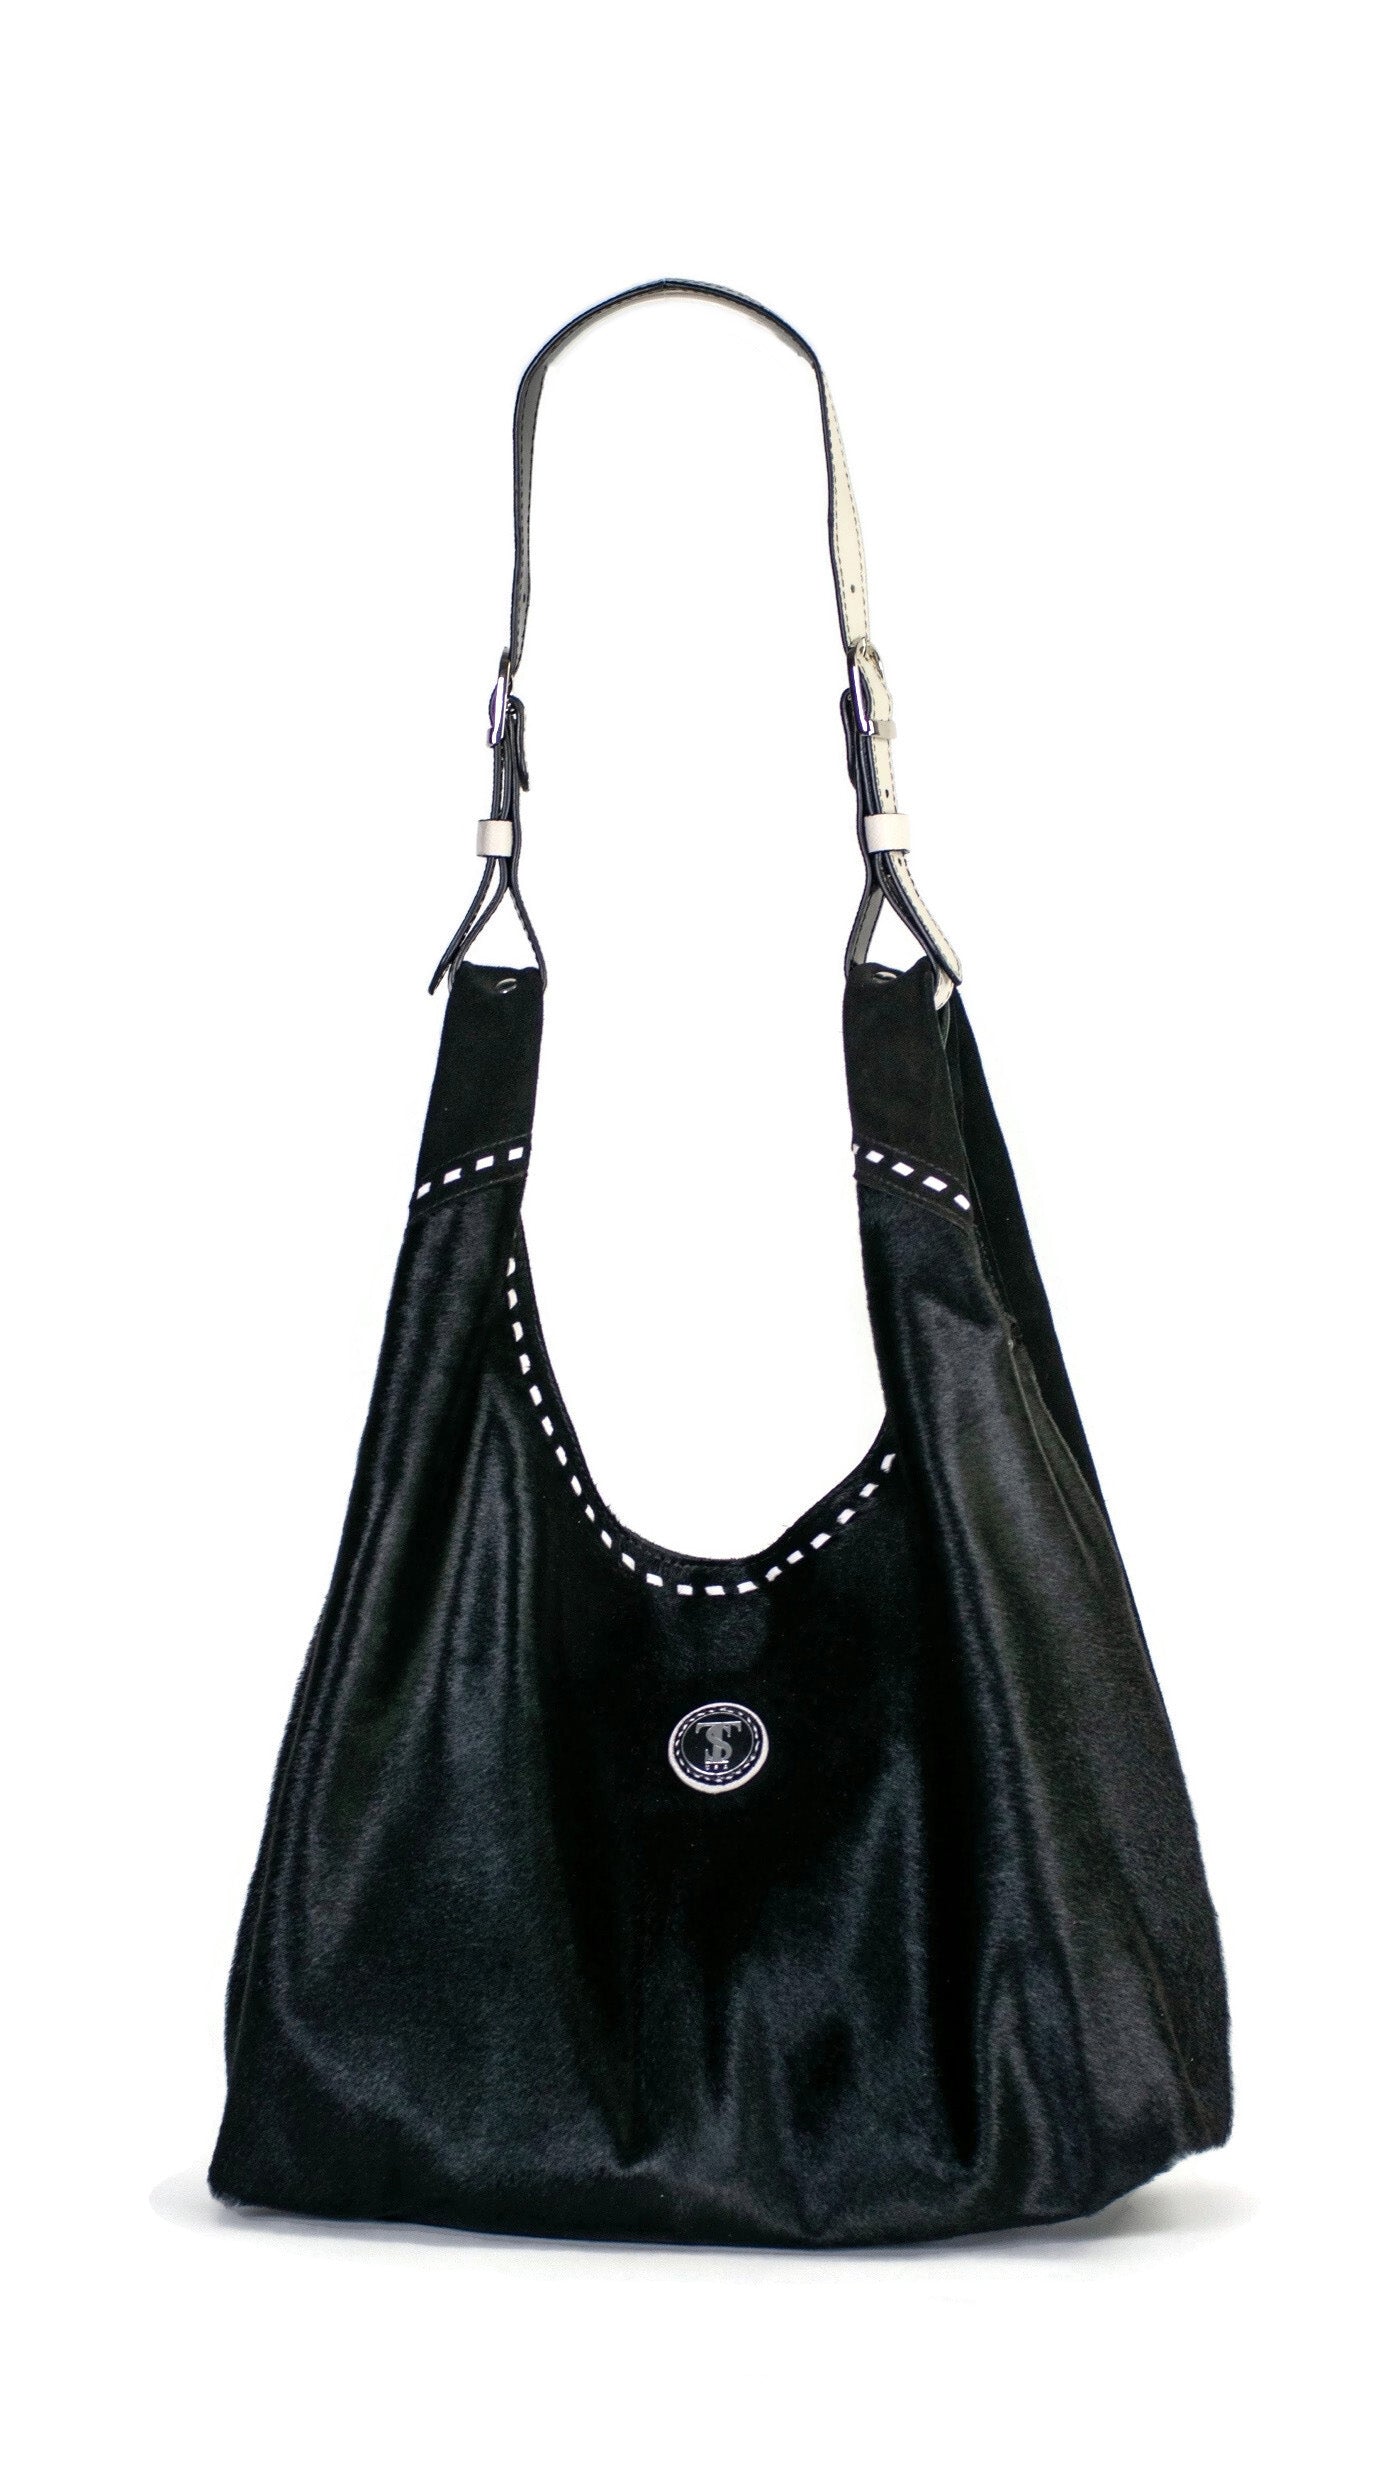 Front of Leather hobo shoulder bag in jet black hair calf &amp; suede. Handcrafted by slow fashion indie designer Liv McClintock. Features hand laced white leather trim. Made in Wilmington Delaware USA.